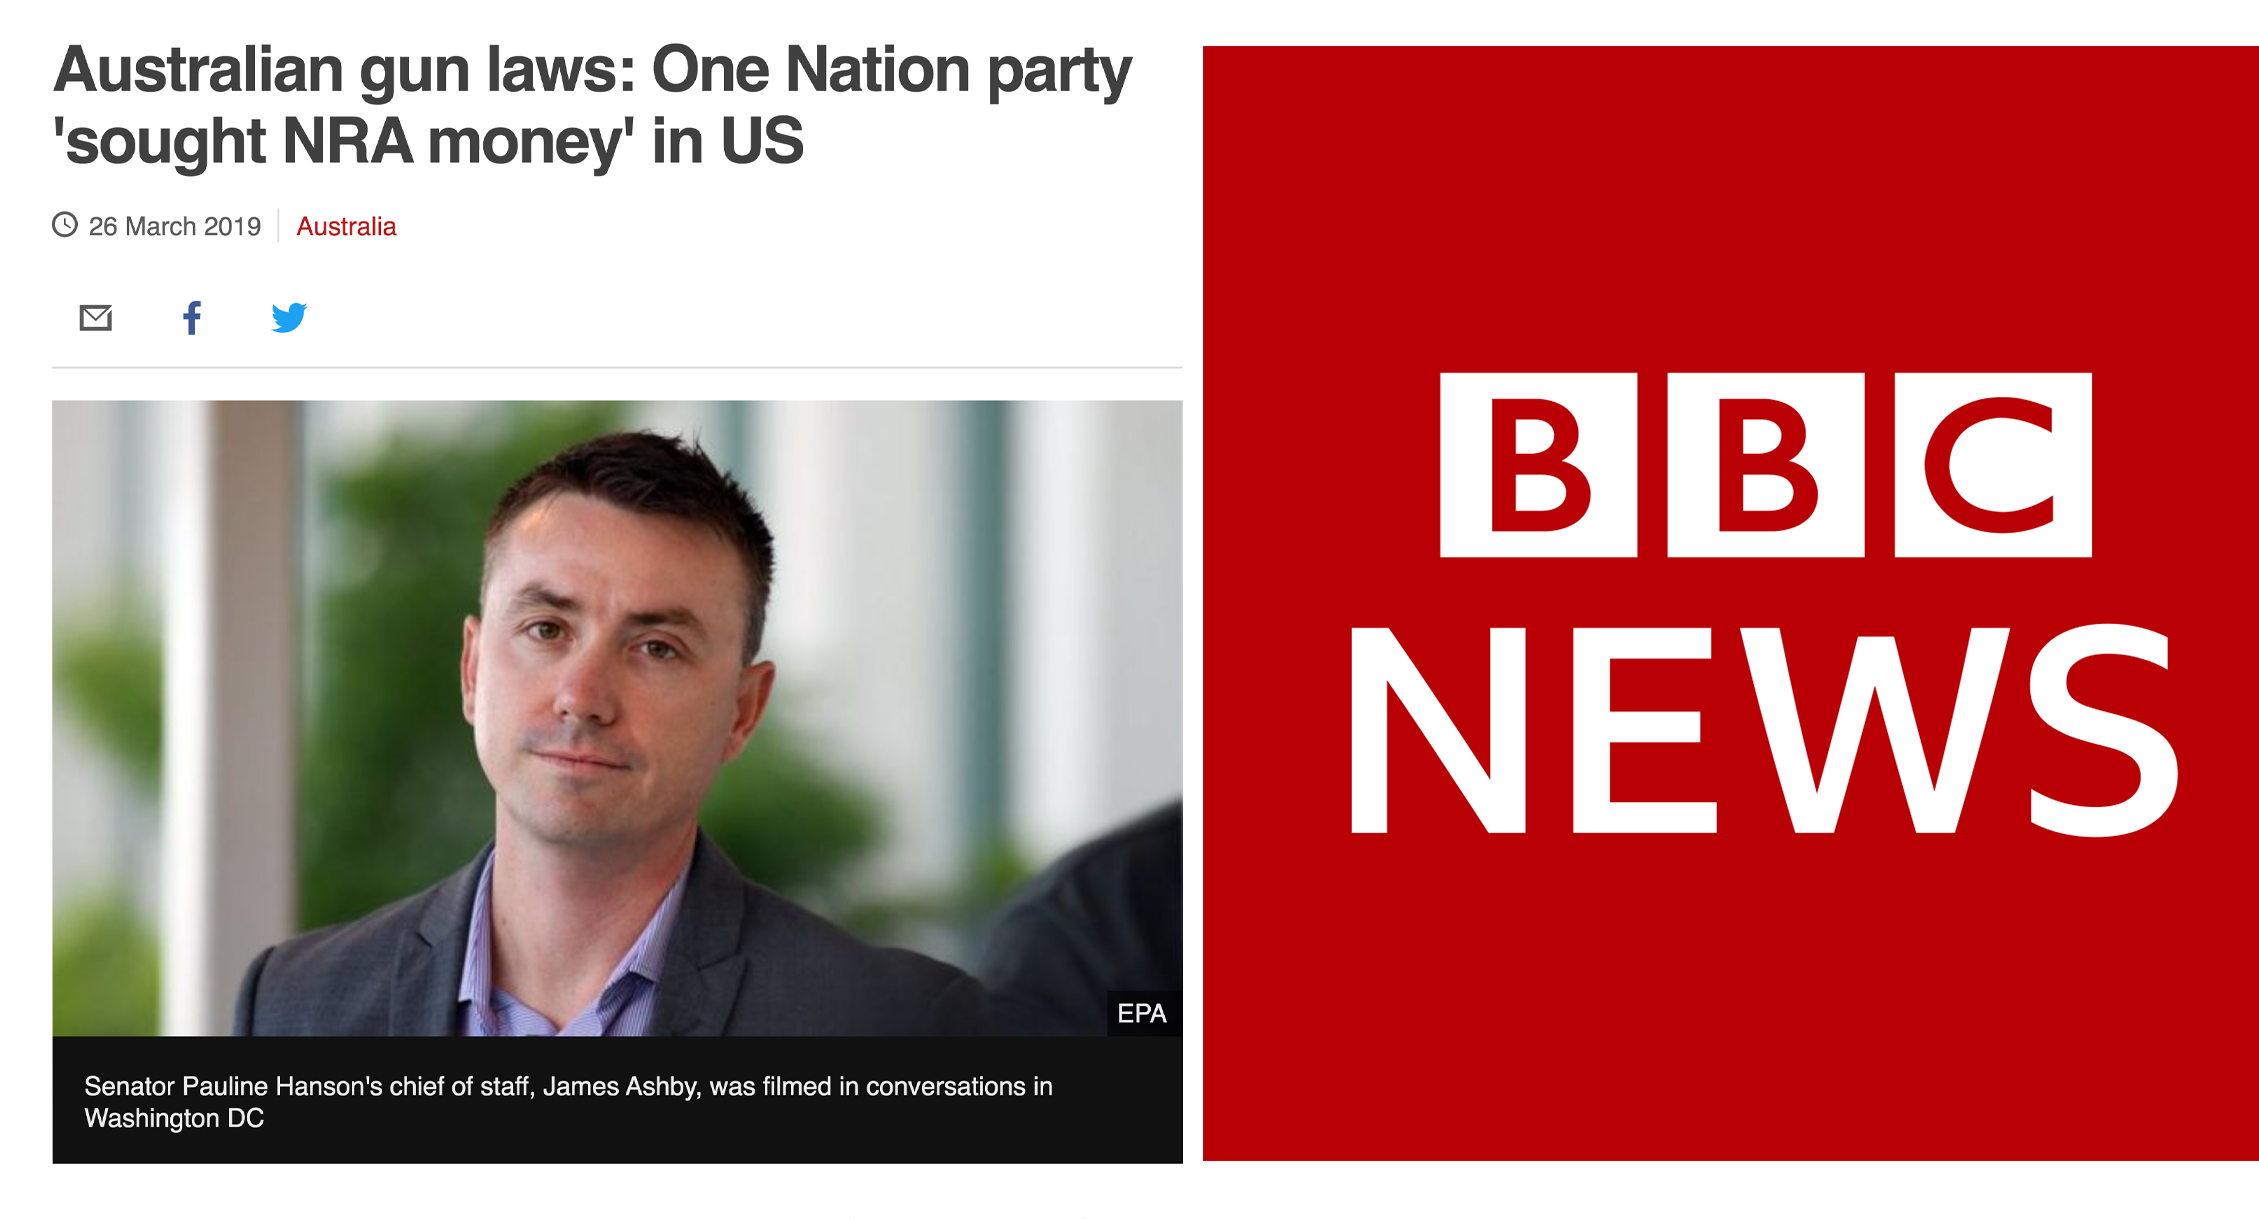 BBC: One Nation party ‘sought NRA money’